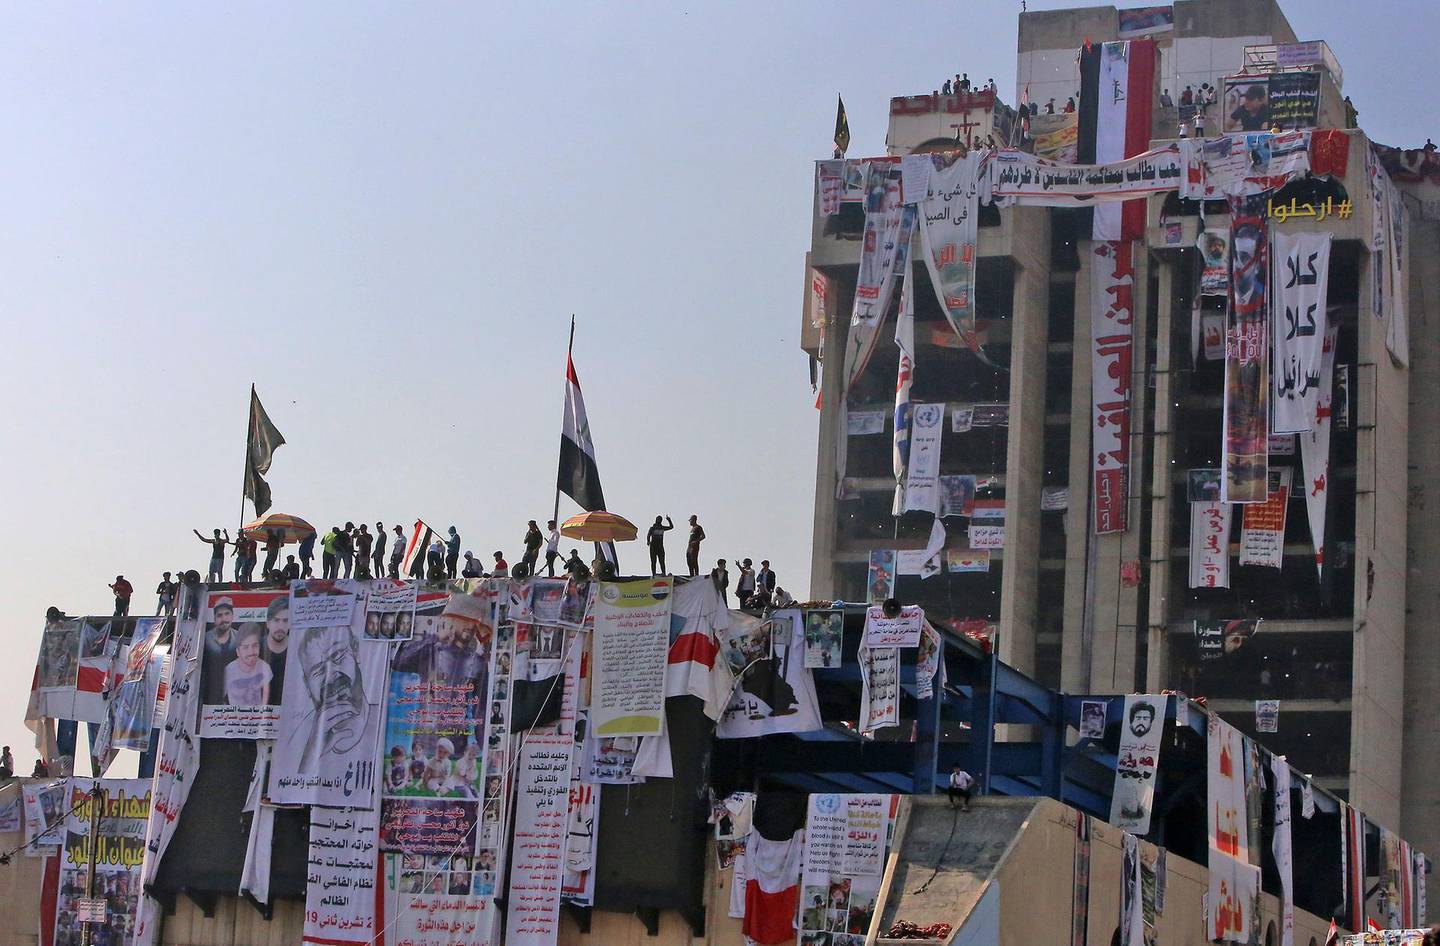 TOPSHOT - Iraqi protesters gather atop the abandoned "Turkish restaurant" building at Baghdad's Tahrir square during ongoing anti-government demonstrations on November 11, 2019. The United States has urged Iraq to hold early polls and carry out electoral reform, after a rights group warned a deadly crackdown on anti-government protesters could spiral into a "bloodbath". Three protesters were shot dead in the southern city of Nasiriyah on November 10 while dozens of demonstrators were wounded in Baghdad. / AFP / SABAH ARAR
